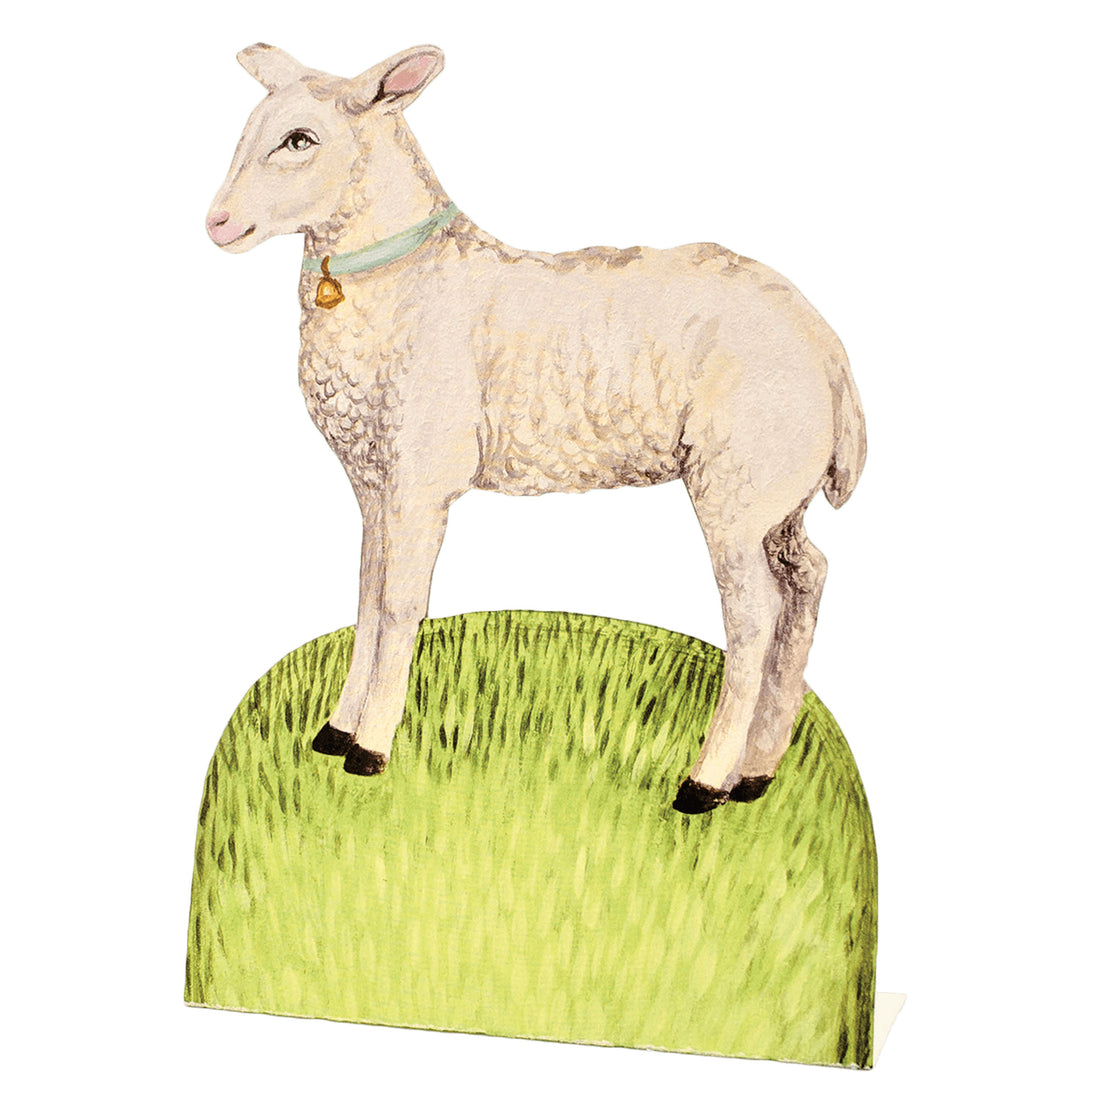 A die-cut freestanding place card featuring artwork of a cute lamb facing left with a bell tied around its neck with a seafoam ribbon, standing on a grassy green hill which provides space to write a personal message.